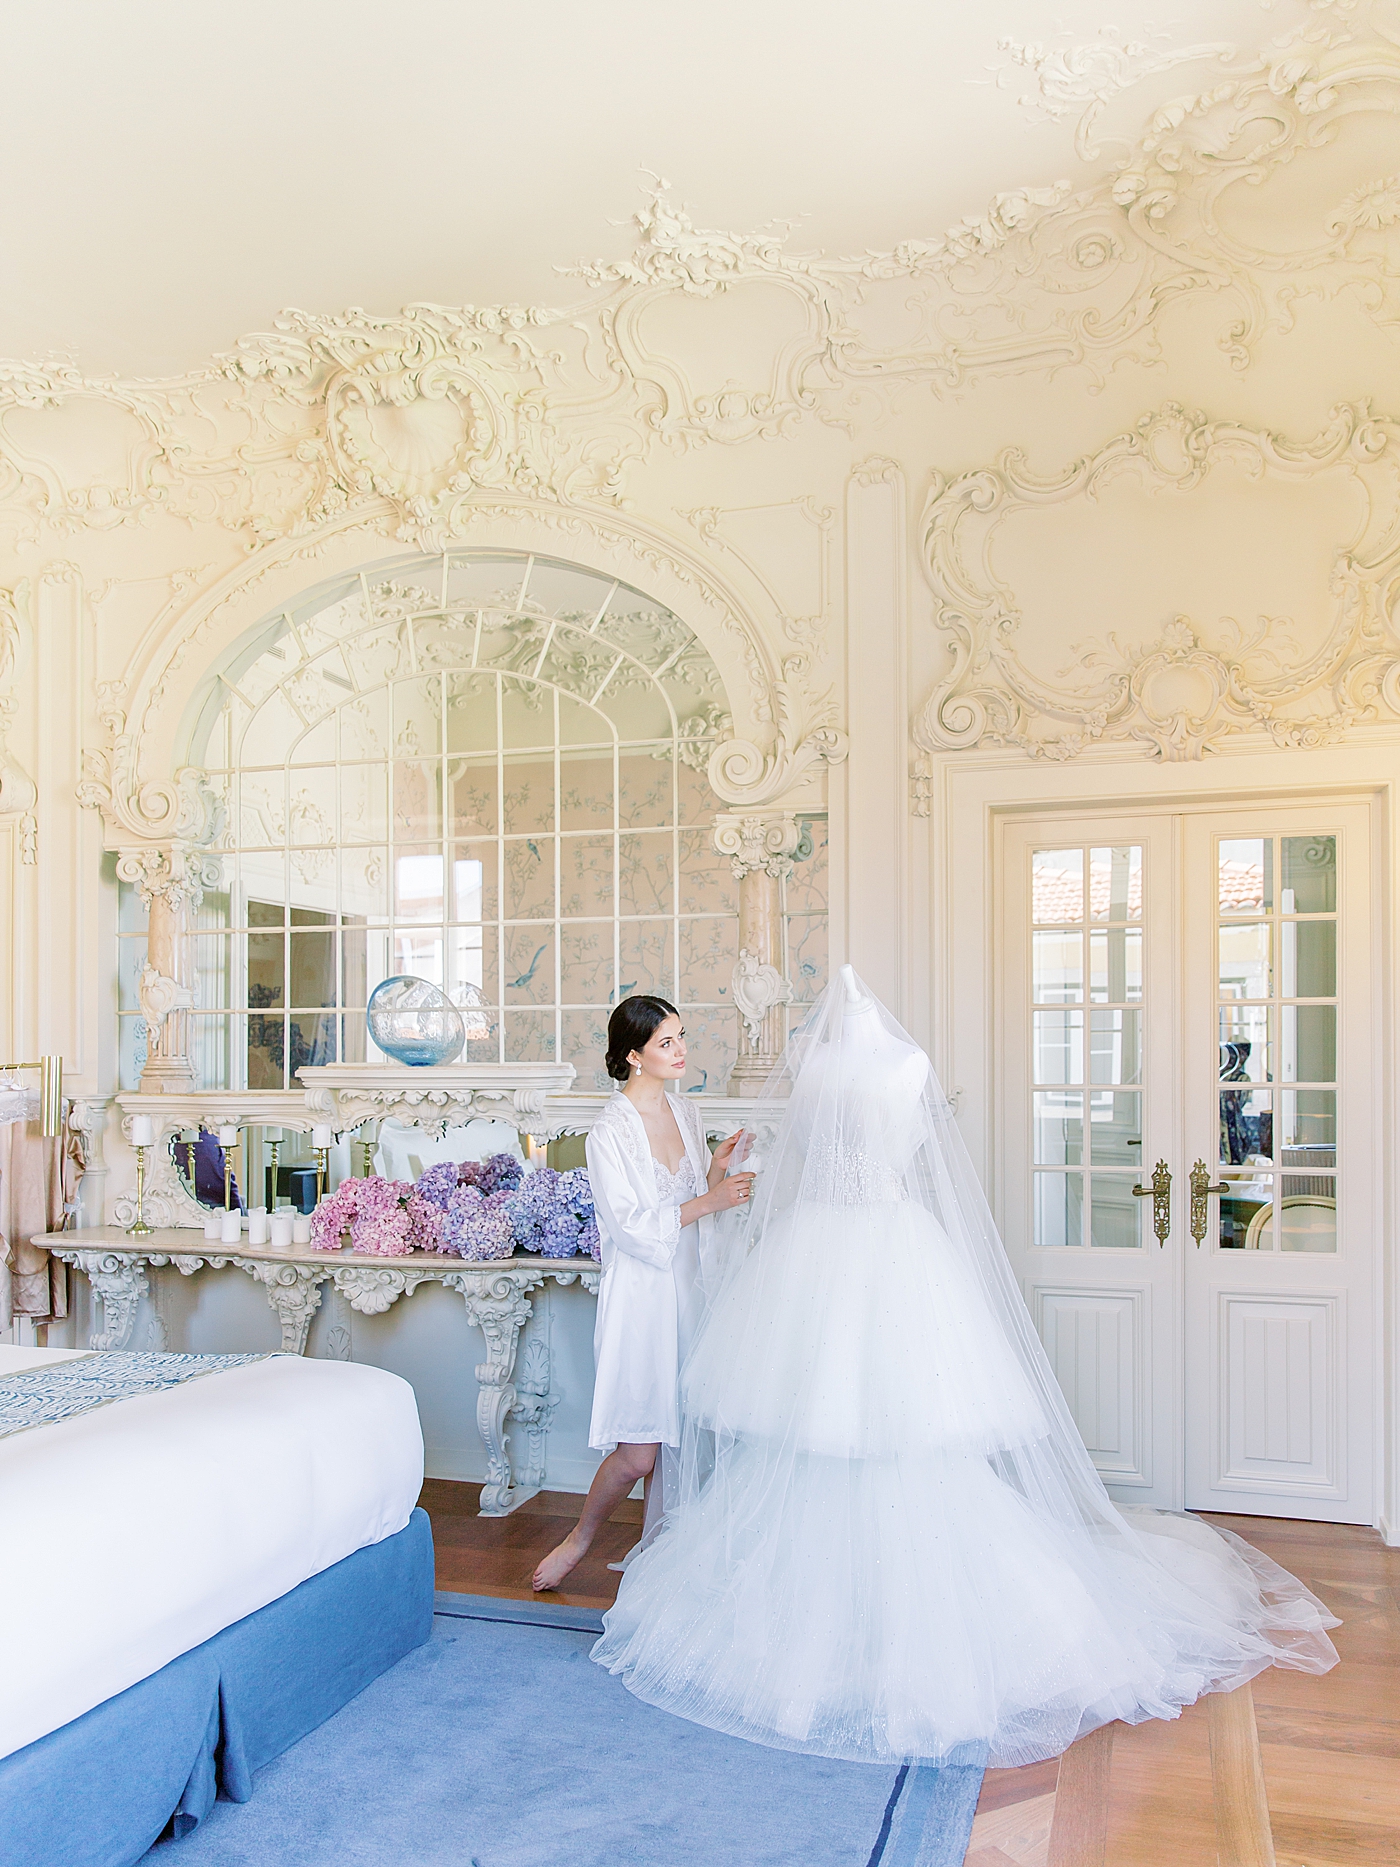 Bride adjusting her couture gown in her getting ready room | Image by Diane Sotero 